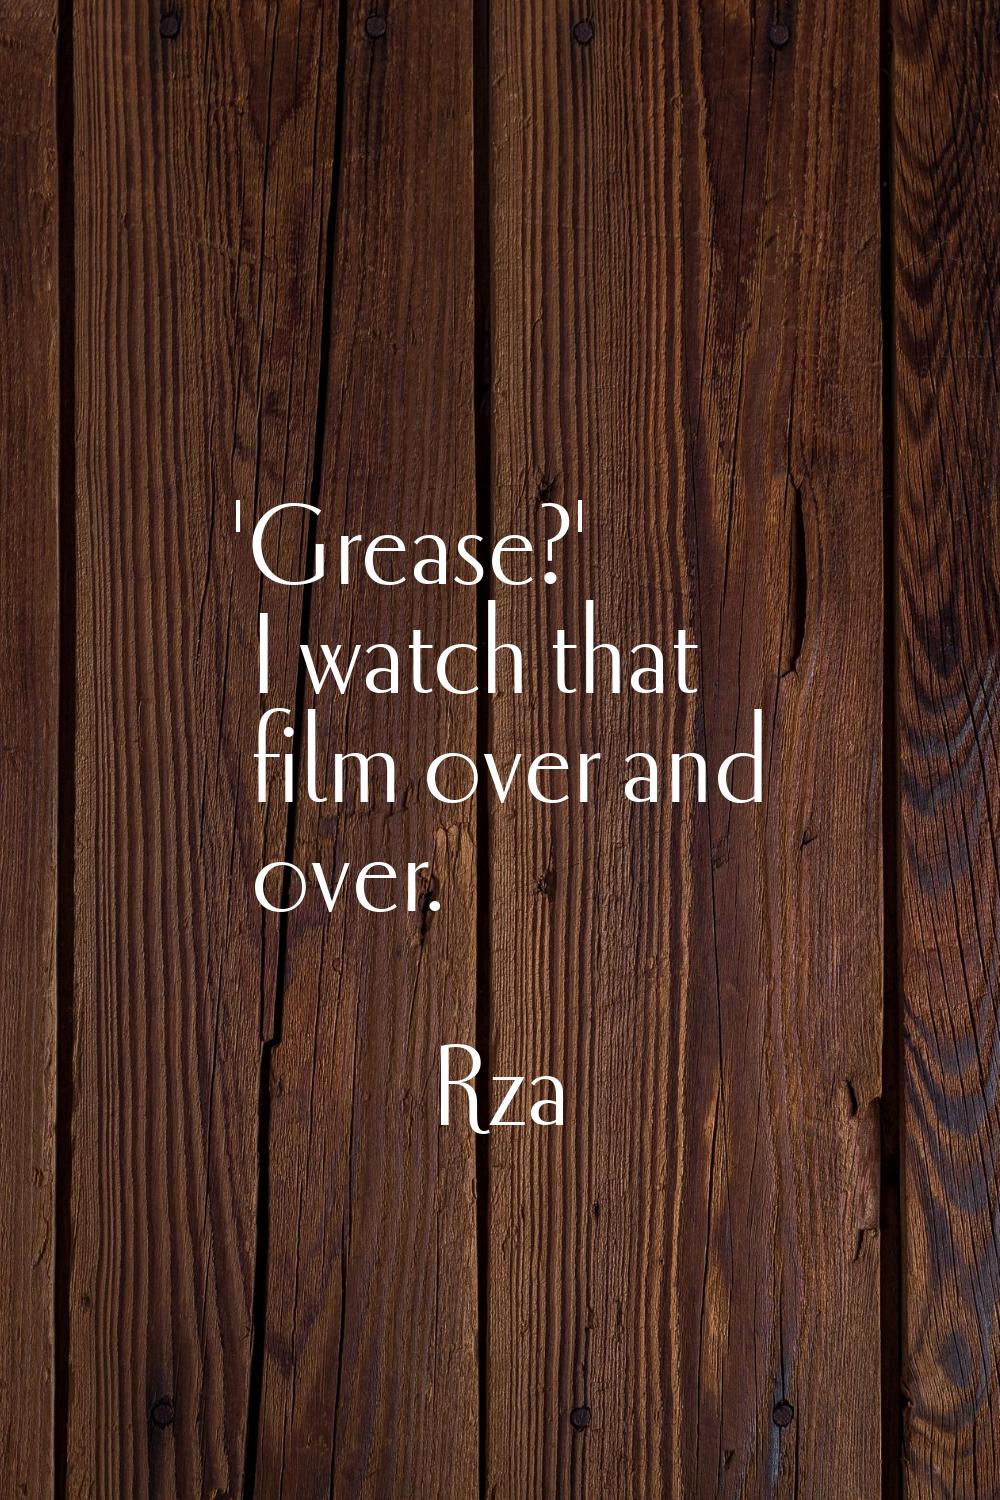 'Grease?' I watch that film over and over.